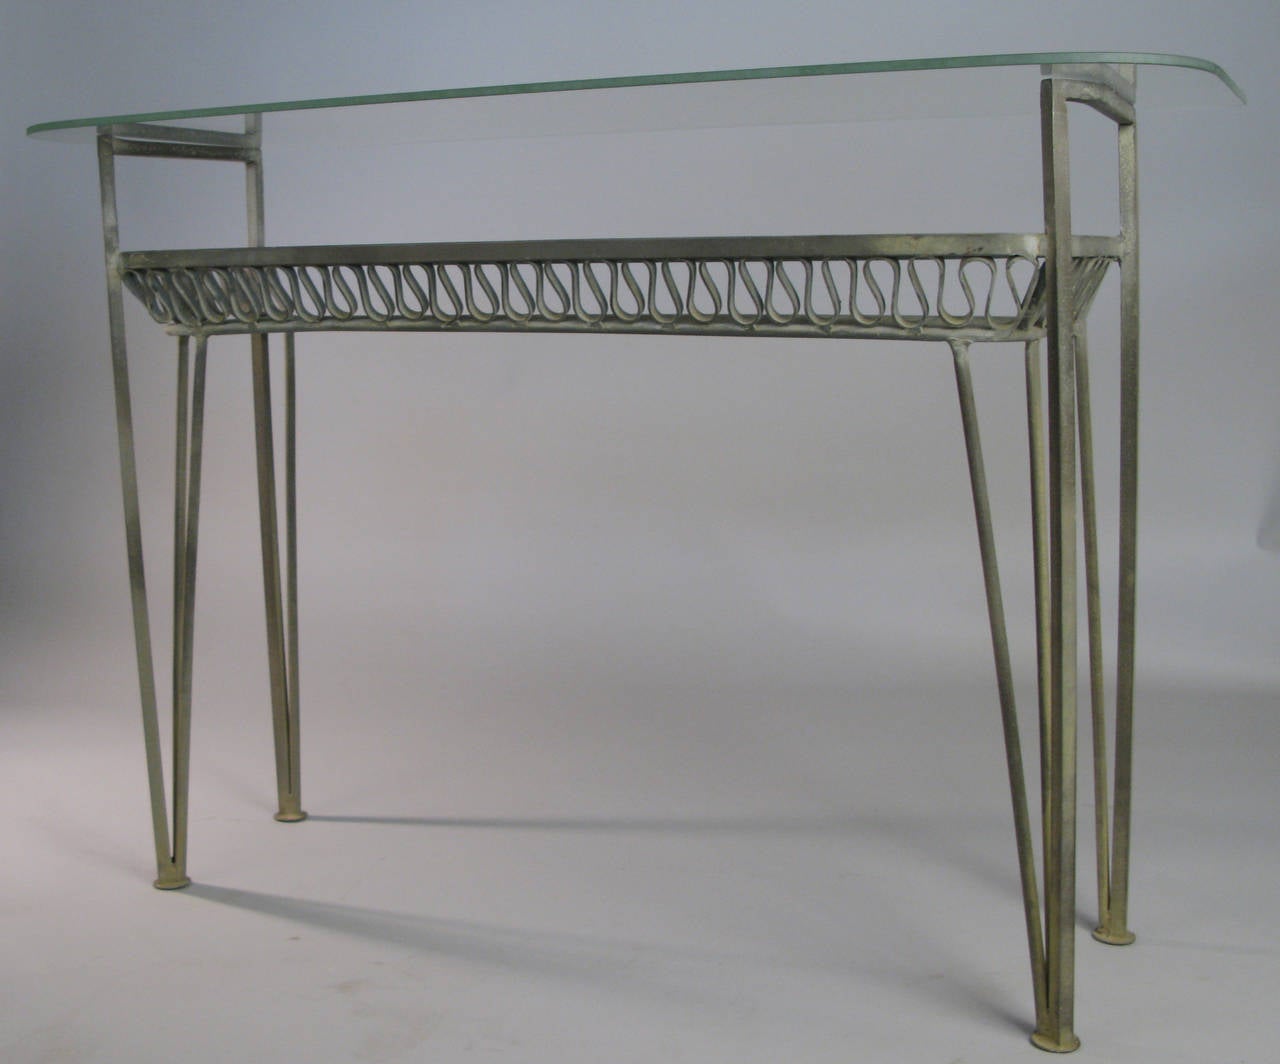 A rare 1950s wrought iron double shelf console table designed by Maurizio Tempestini for Salterini, with two long glass shelves and Tempestini's signature iron ribbon design under the lower shelf. Wonderful original patina.